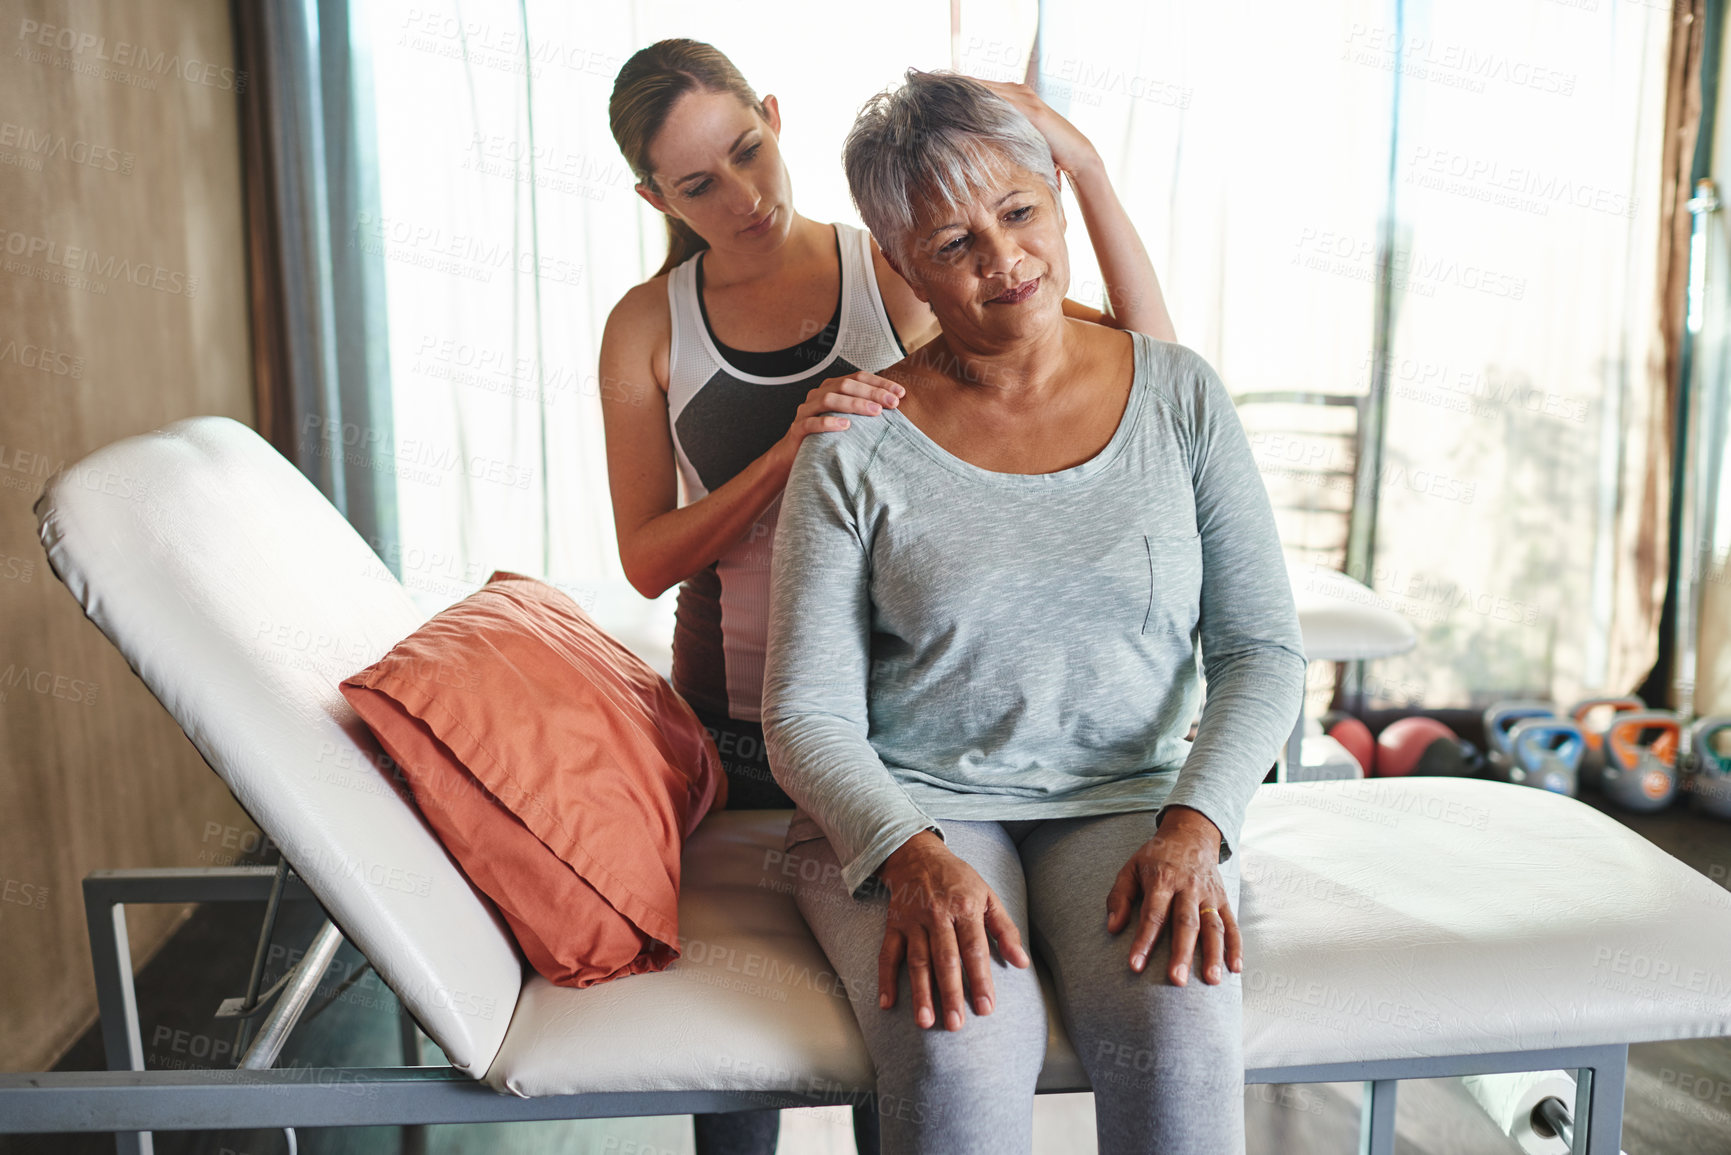 Buy stock photo Physiotherapy, old woman and neck injury or rehabilitation pain, consultation or muscle. Client, assessment and accident mobility or stretching results for strain healing or joint, recovery or help